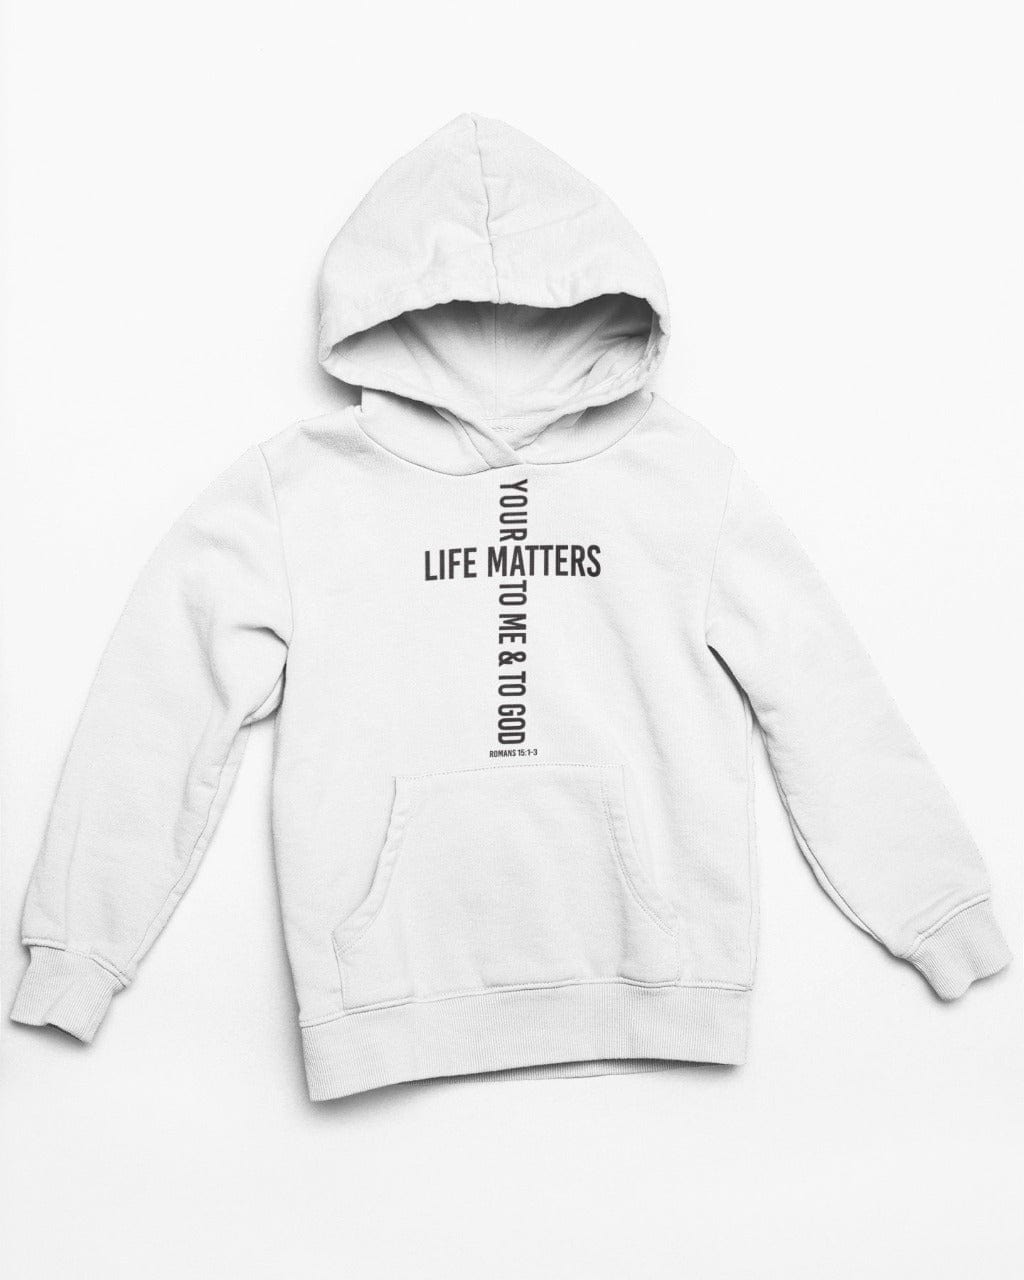 Wrighteous Wear Hoodie White / S Your Life Matters Unisex Christian Hoodie